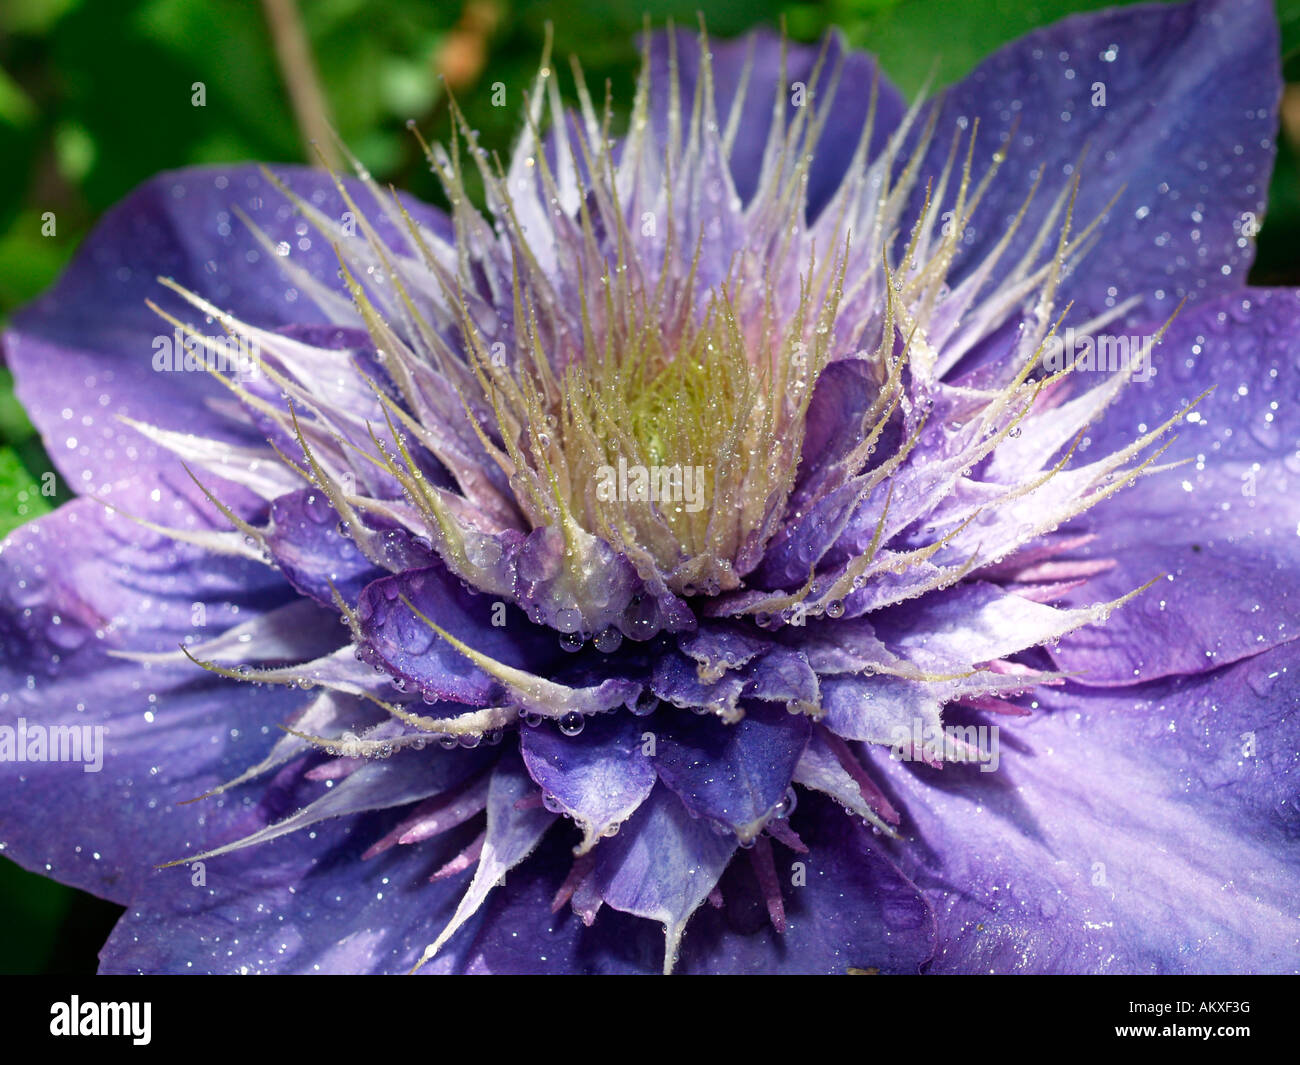 Clematis (Multiblue Clematis/Clematite) with waterdrops Stock Photo